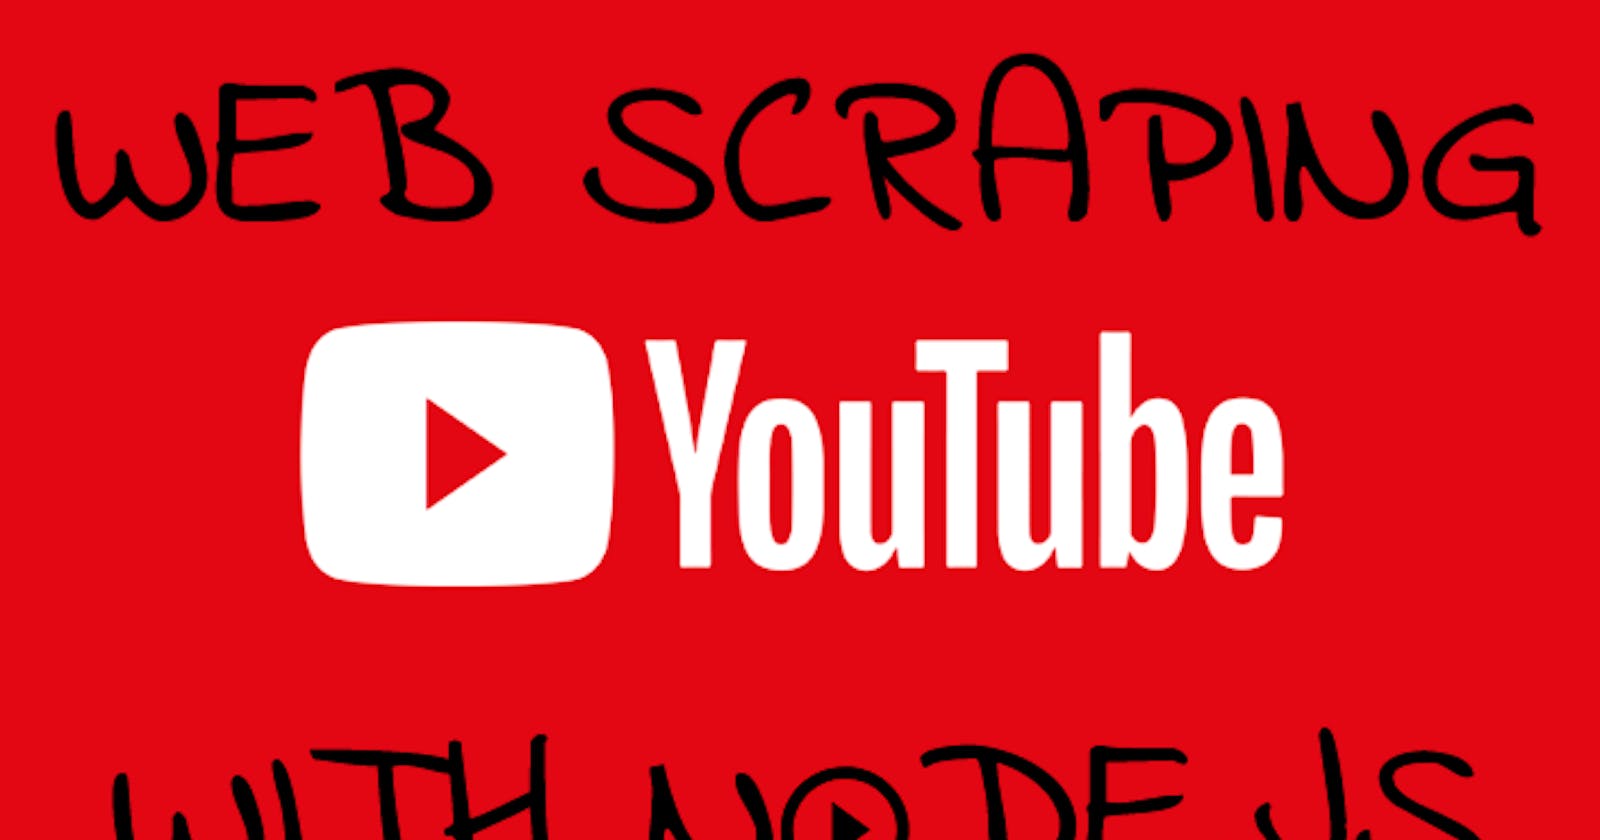 Web scraping YouTube secondary search results with Nodejs